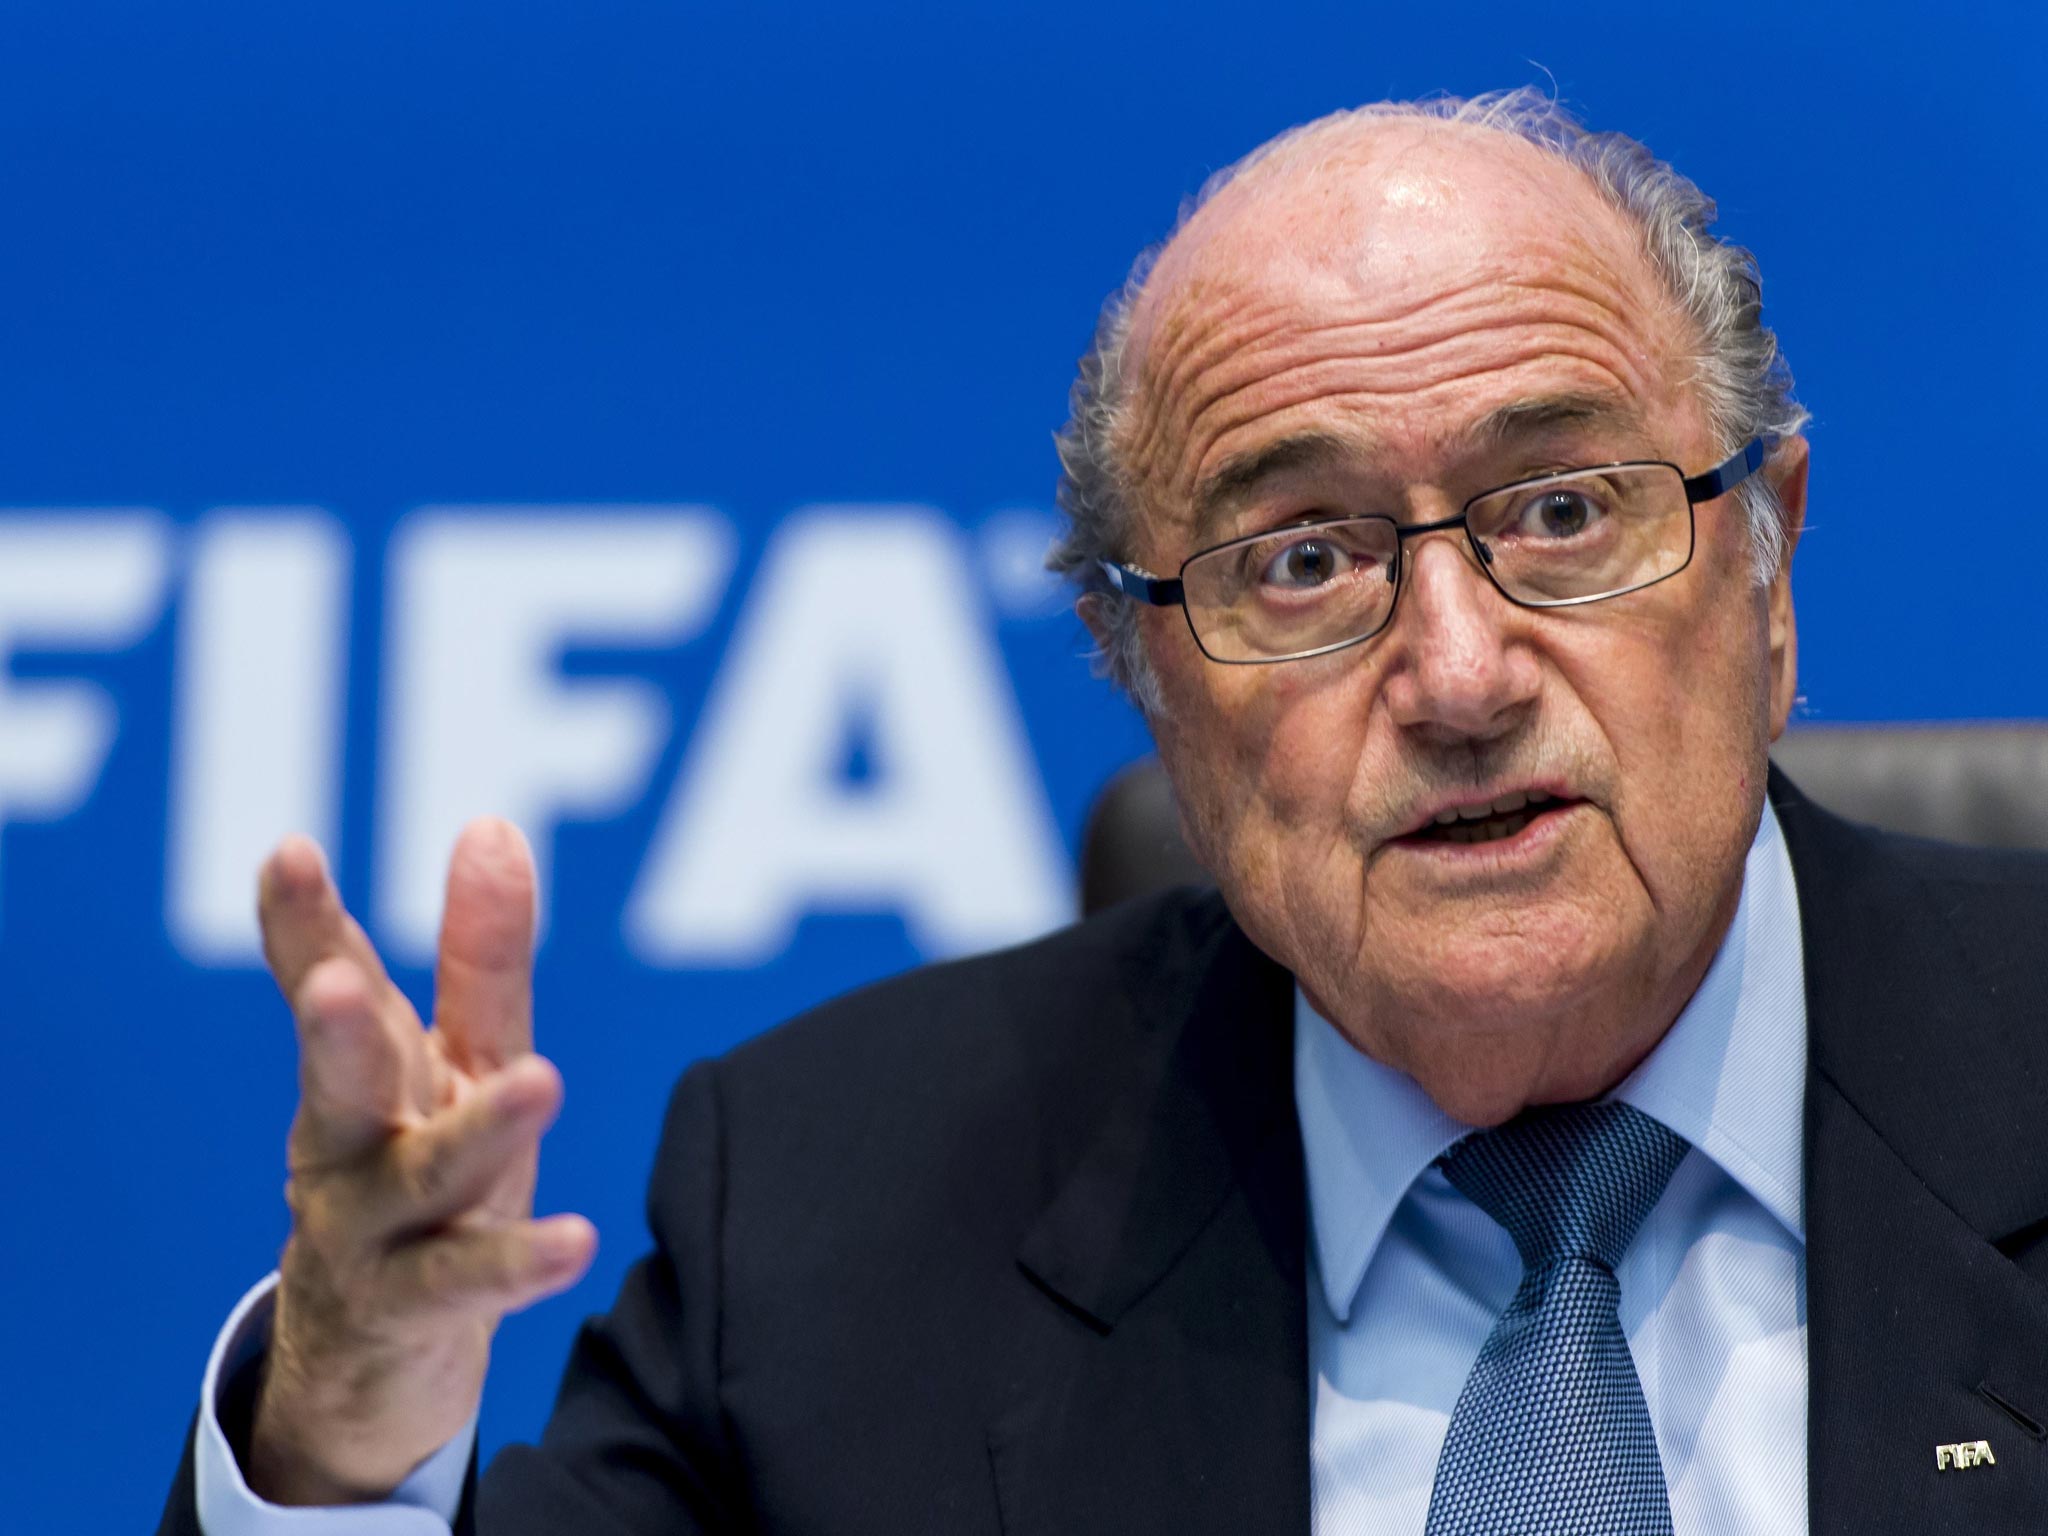 Fifa rushed out a statement claiming Blatter's comments were "in line with previous comments on this matter"